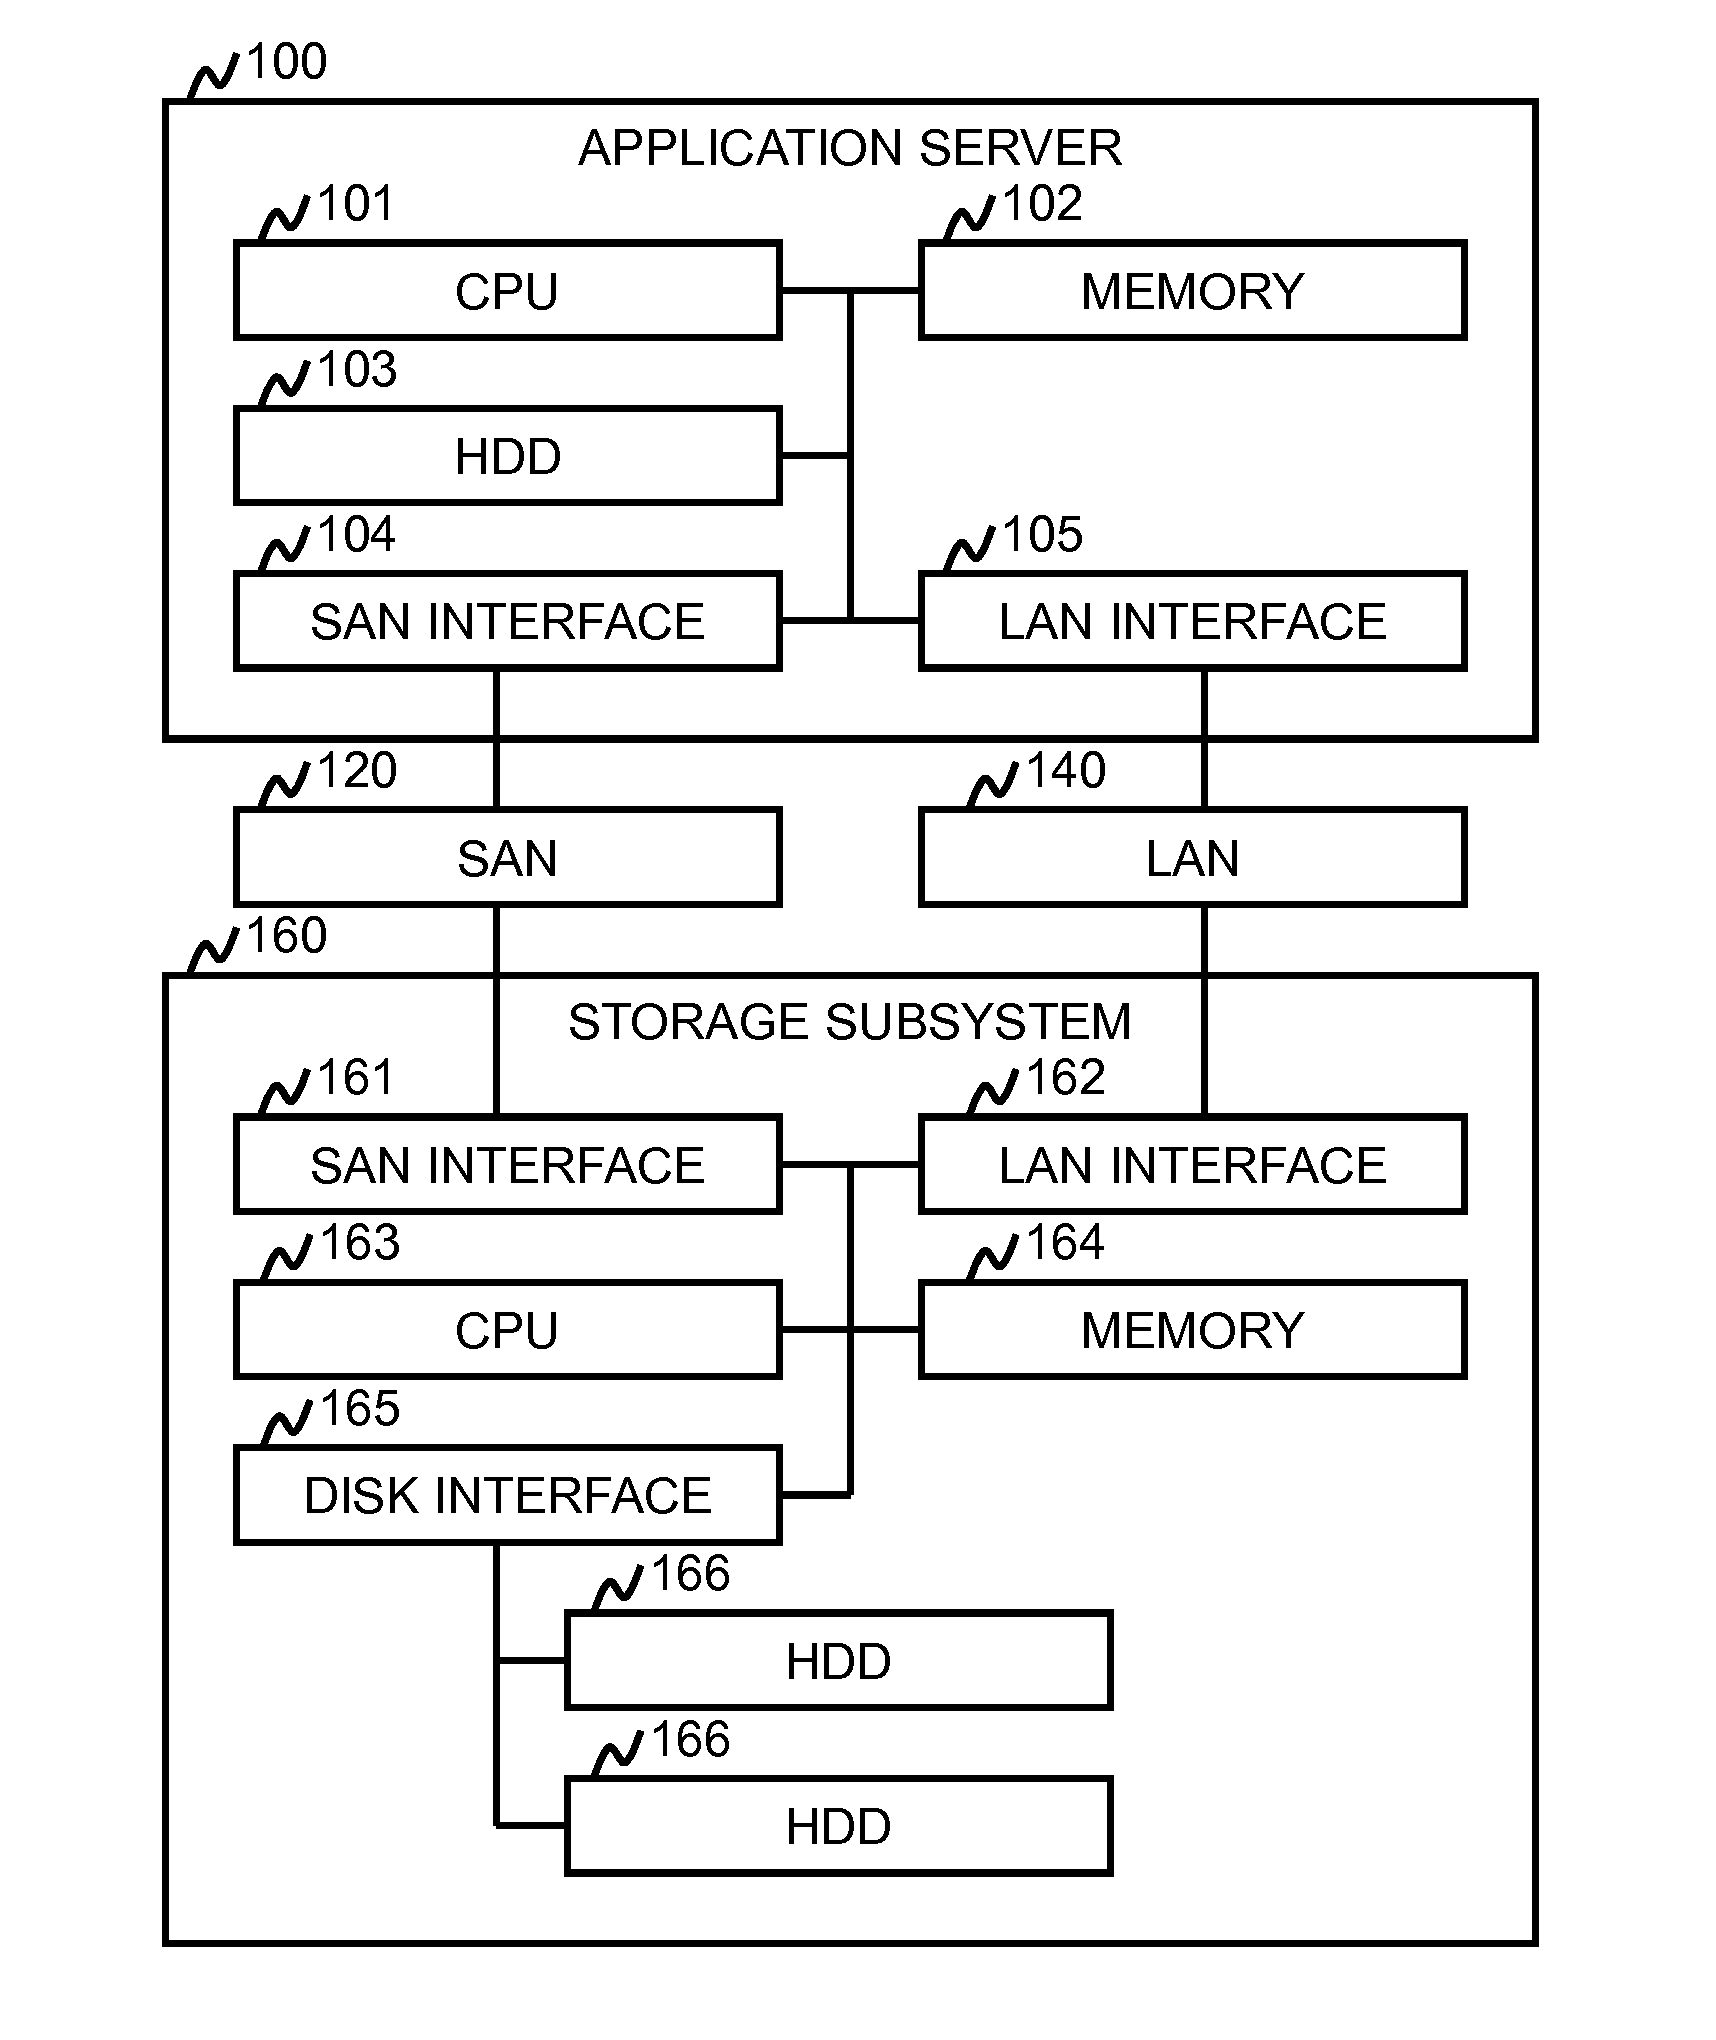 Method and Apparatus to Align and Deduplicate Objects